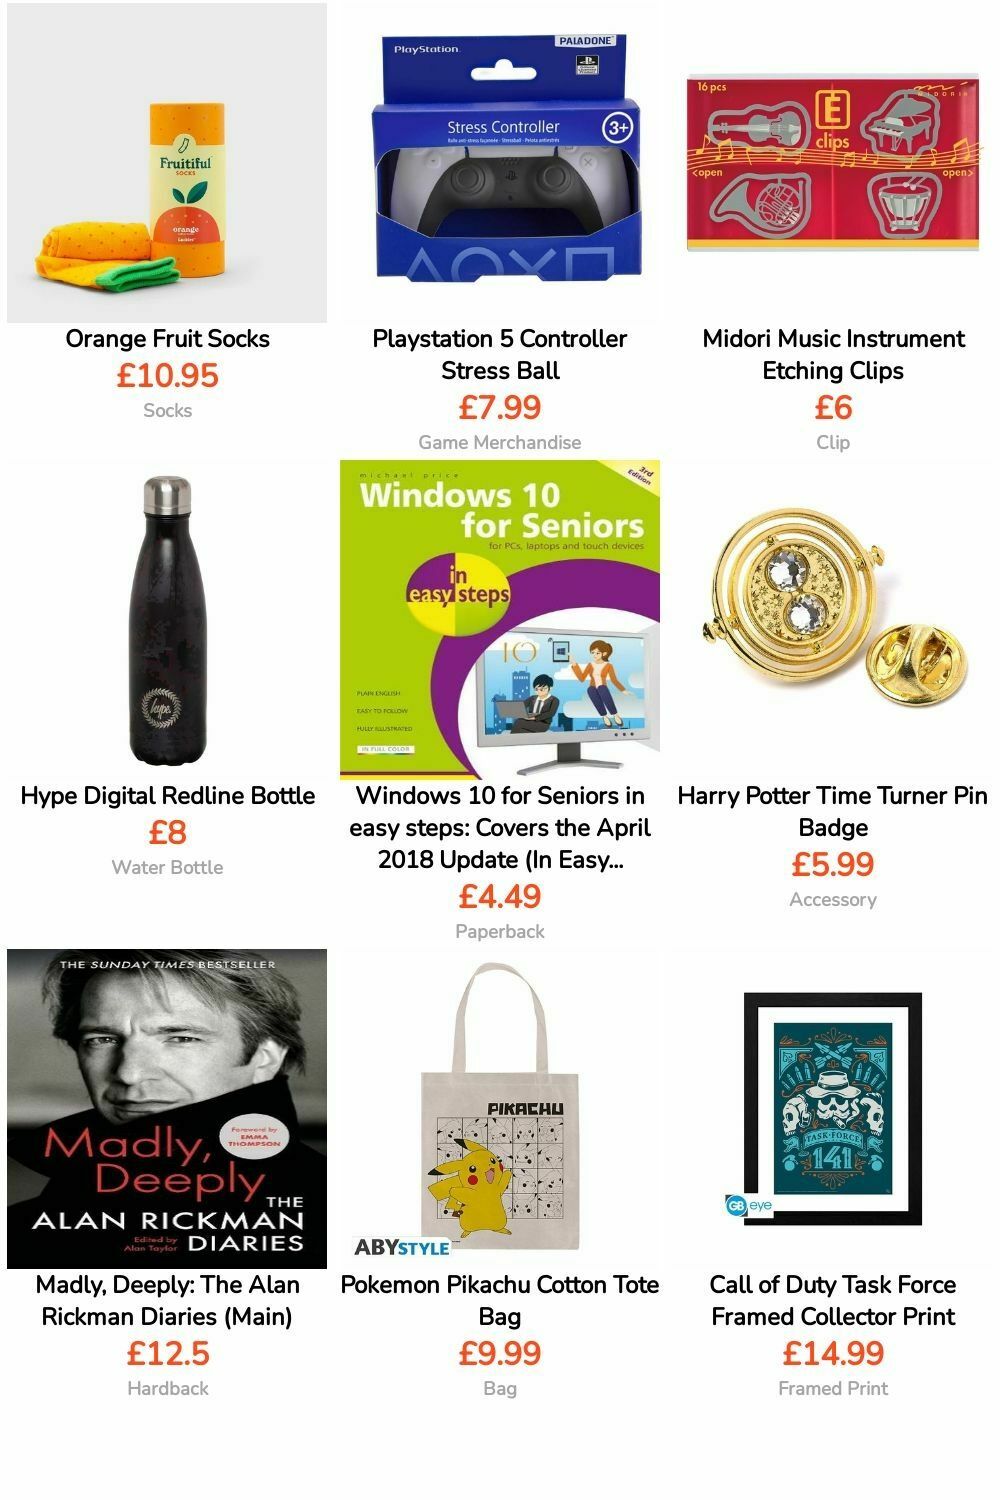 WHSmith Offers from 5 December